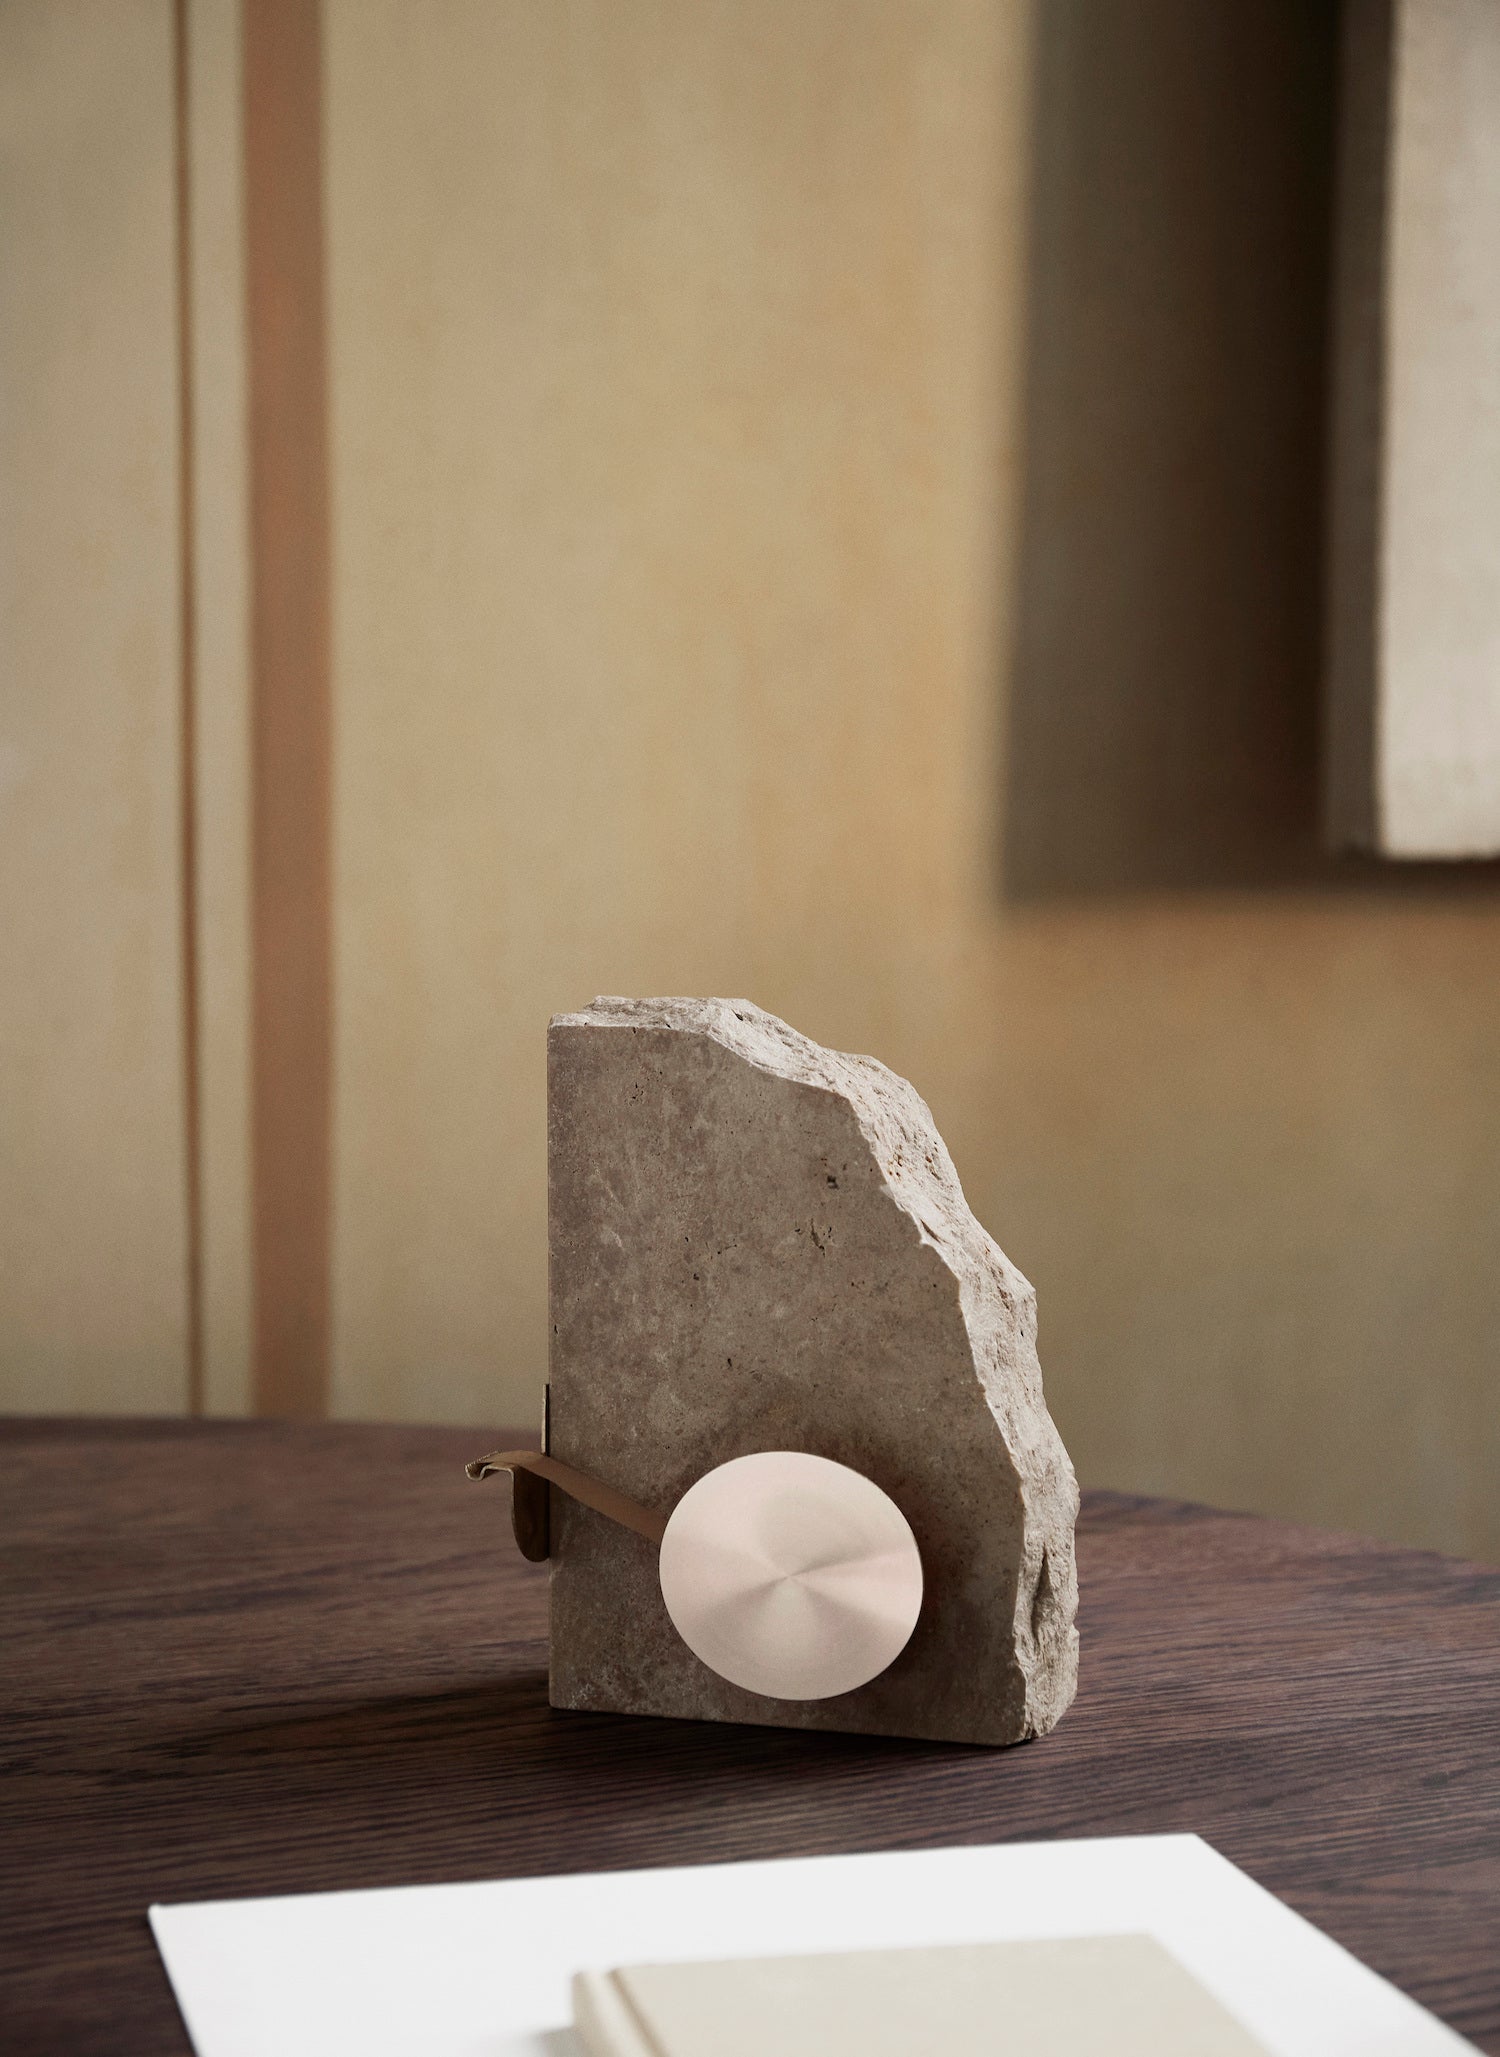 Klint Tape Dispenser. An elevated office accessory with a base made from travertine stone and functional tape dispenser features made of brushed brass. 